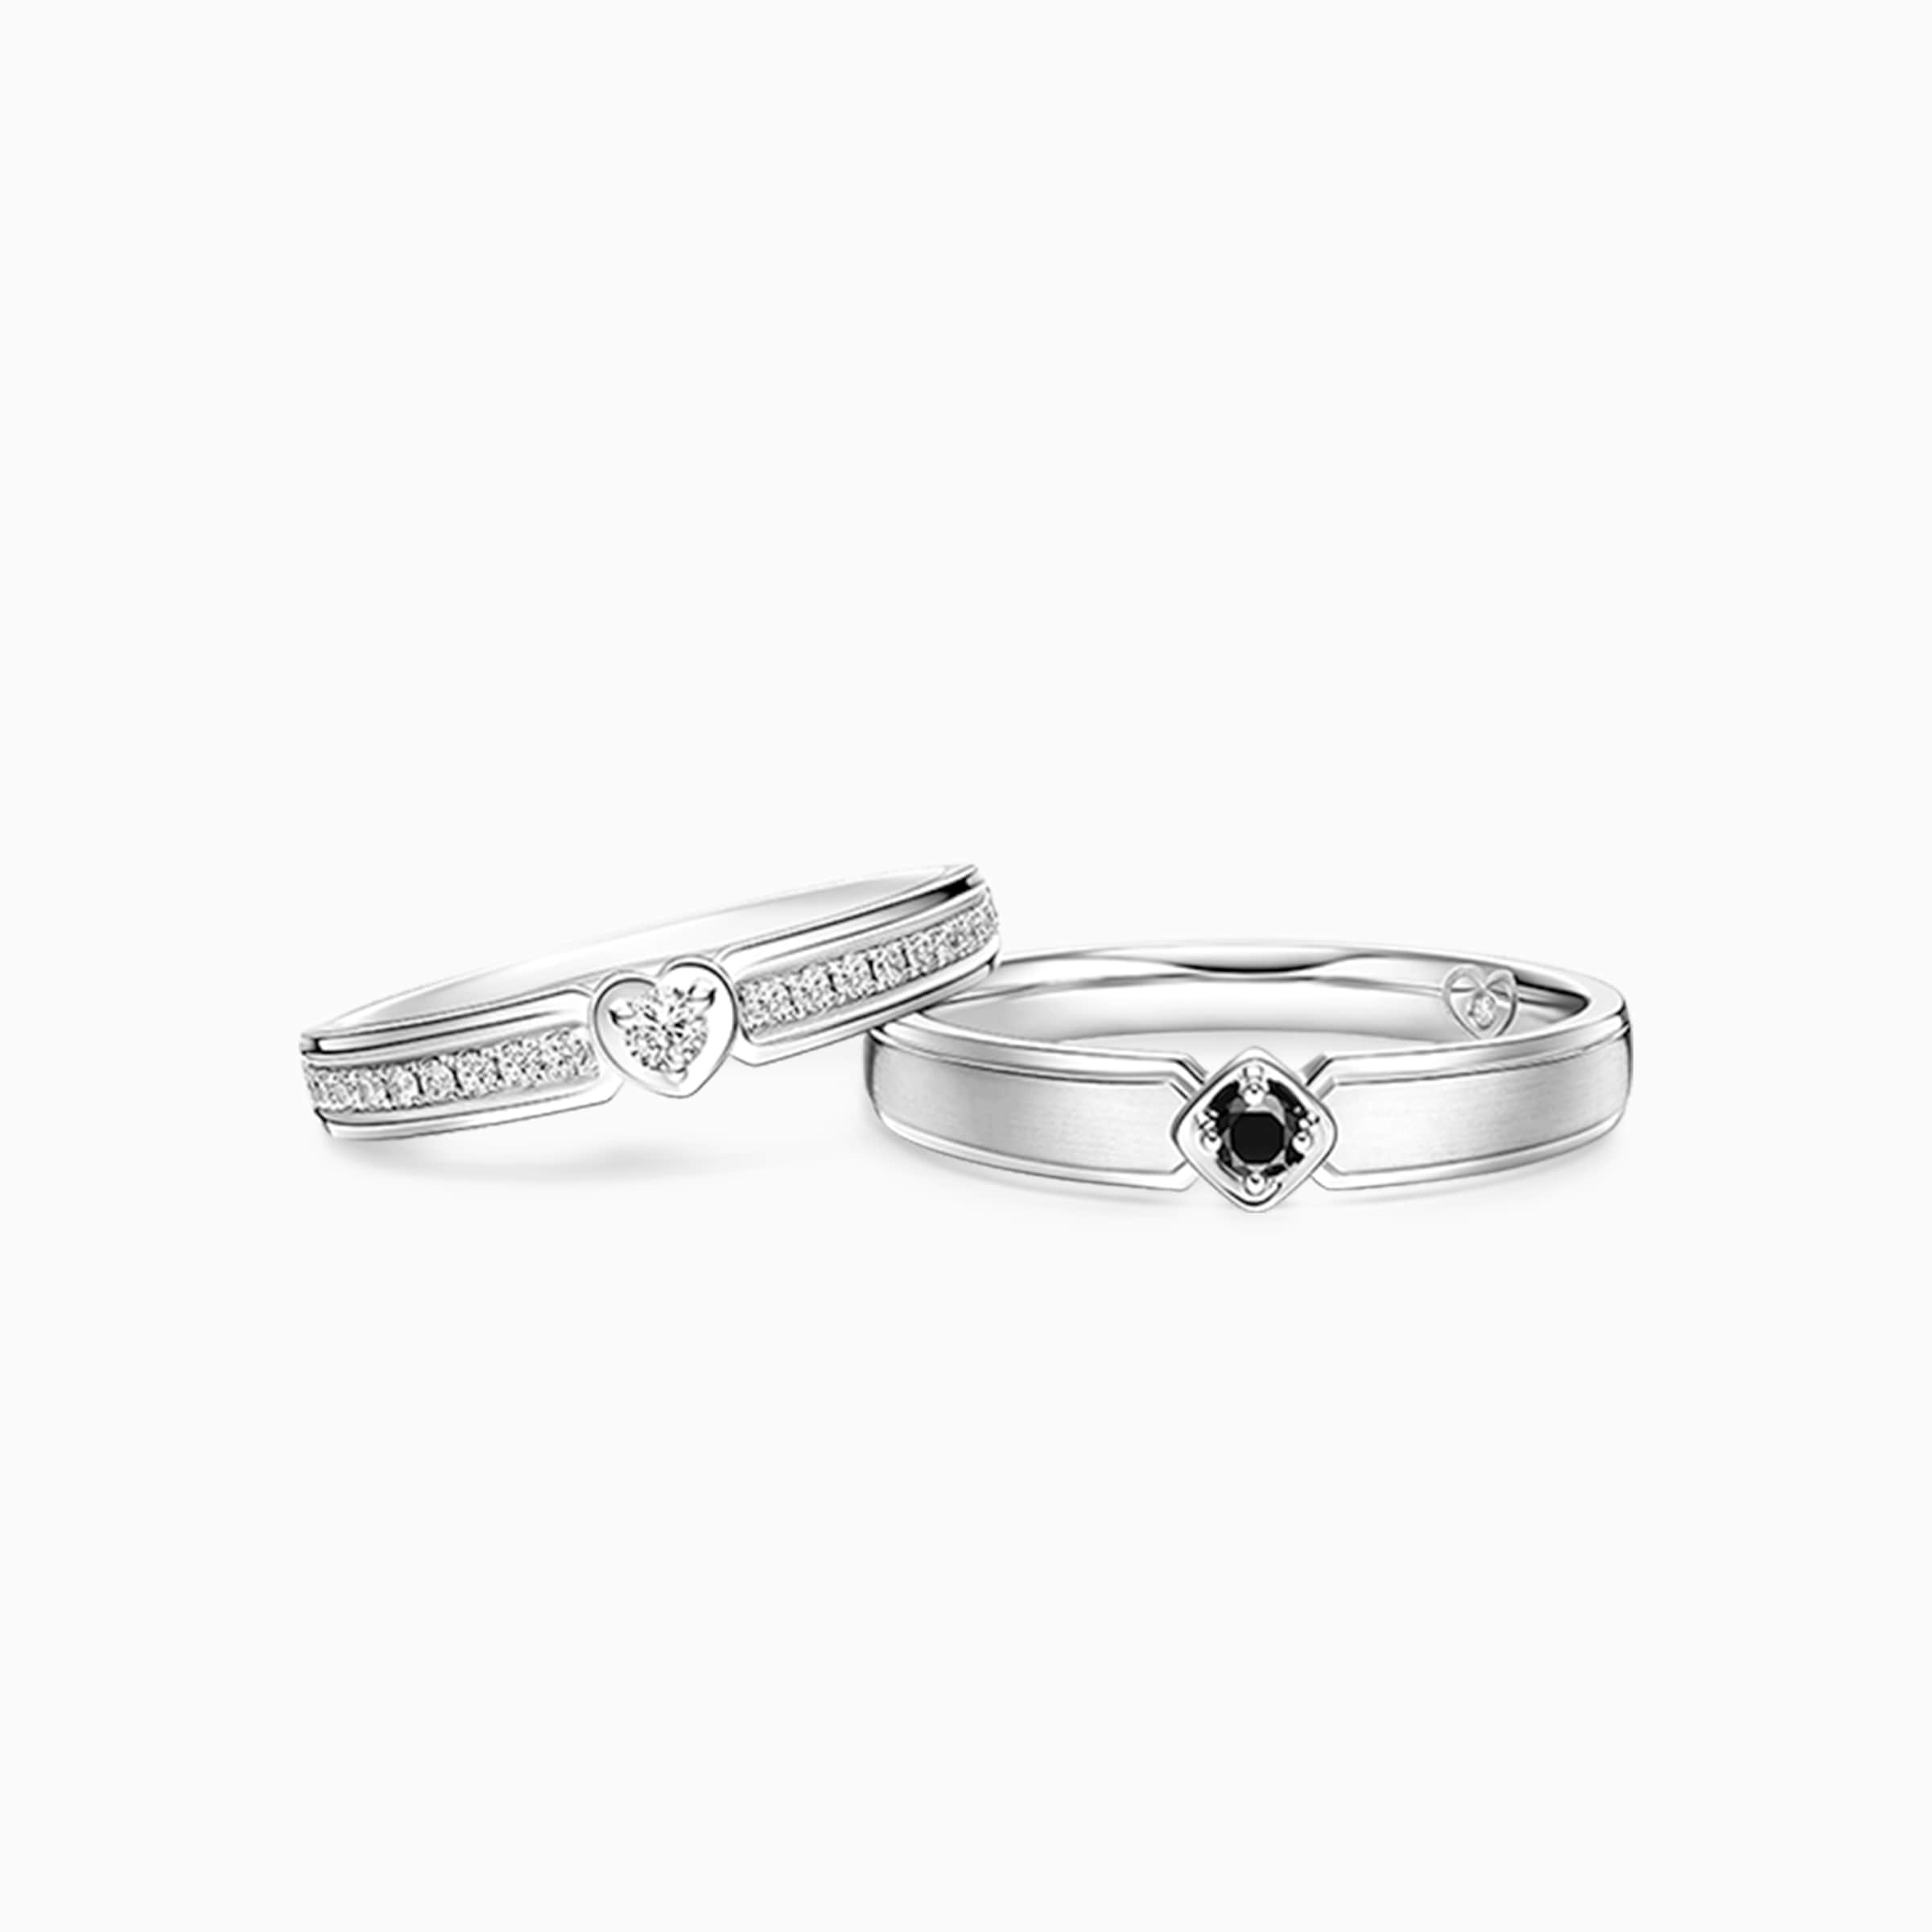 Darry Ring diamond wedding rings set for man and woman in white gold